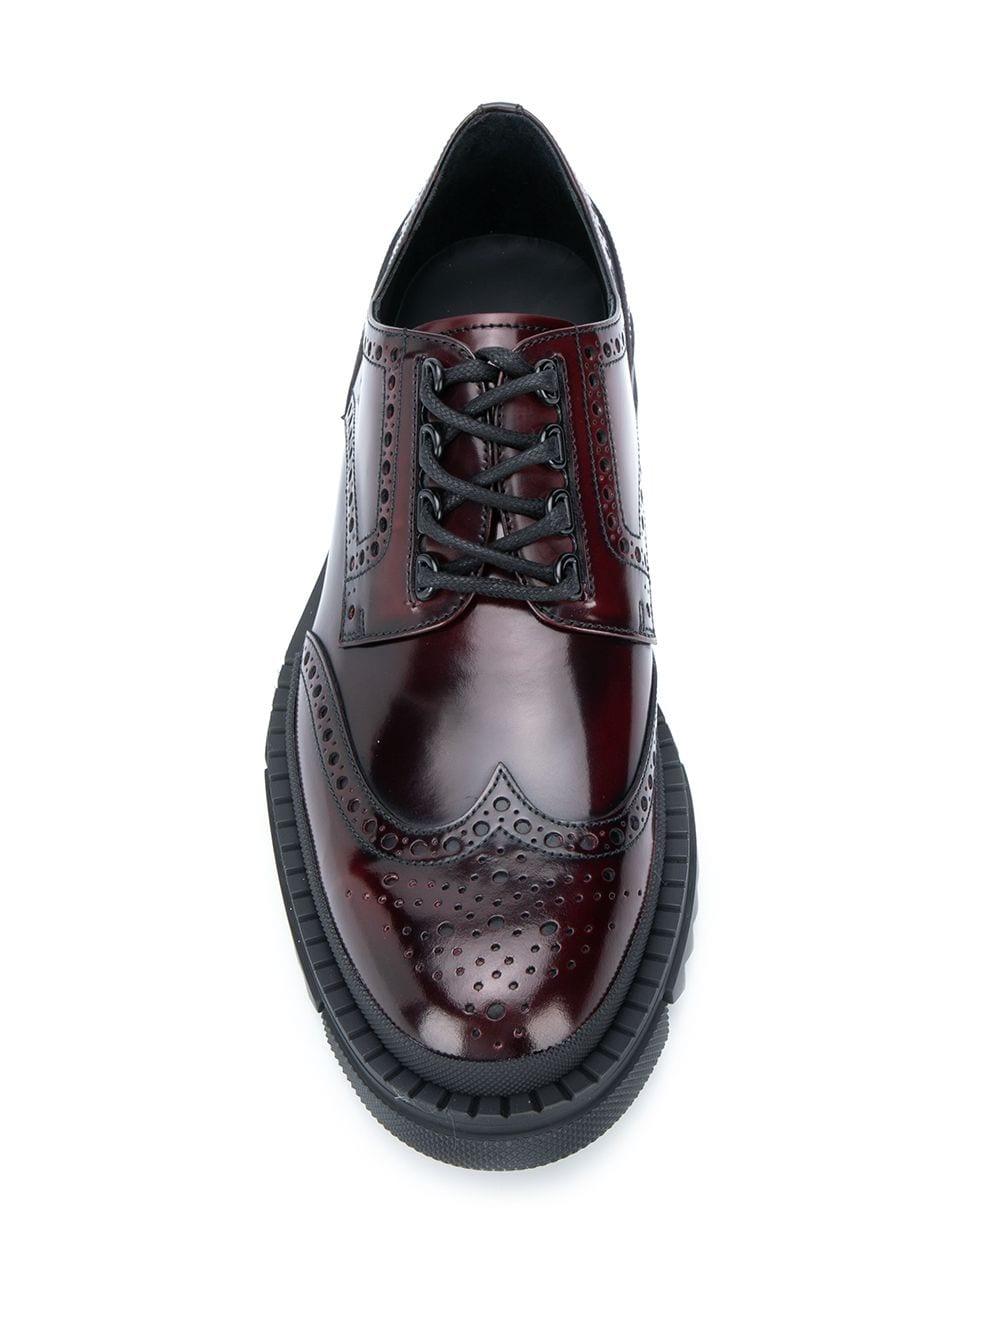 Versace Chunky Brogues in Red for Men - Lyst